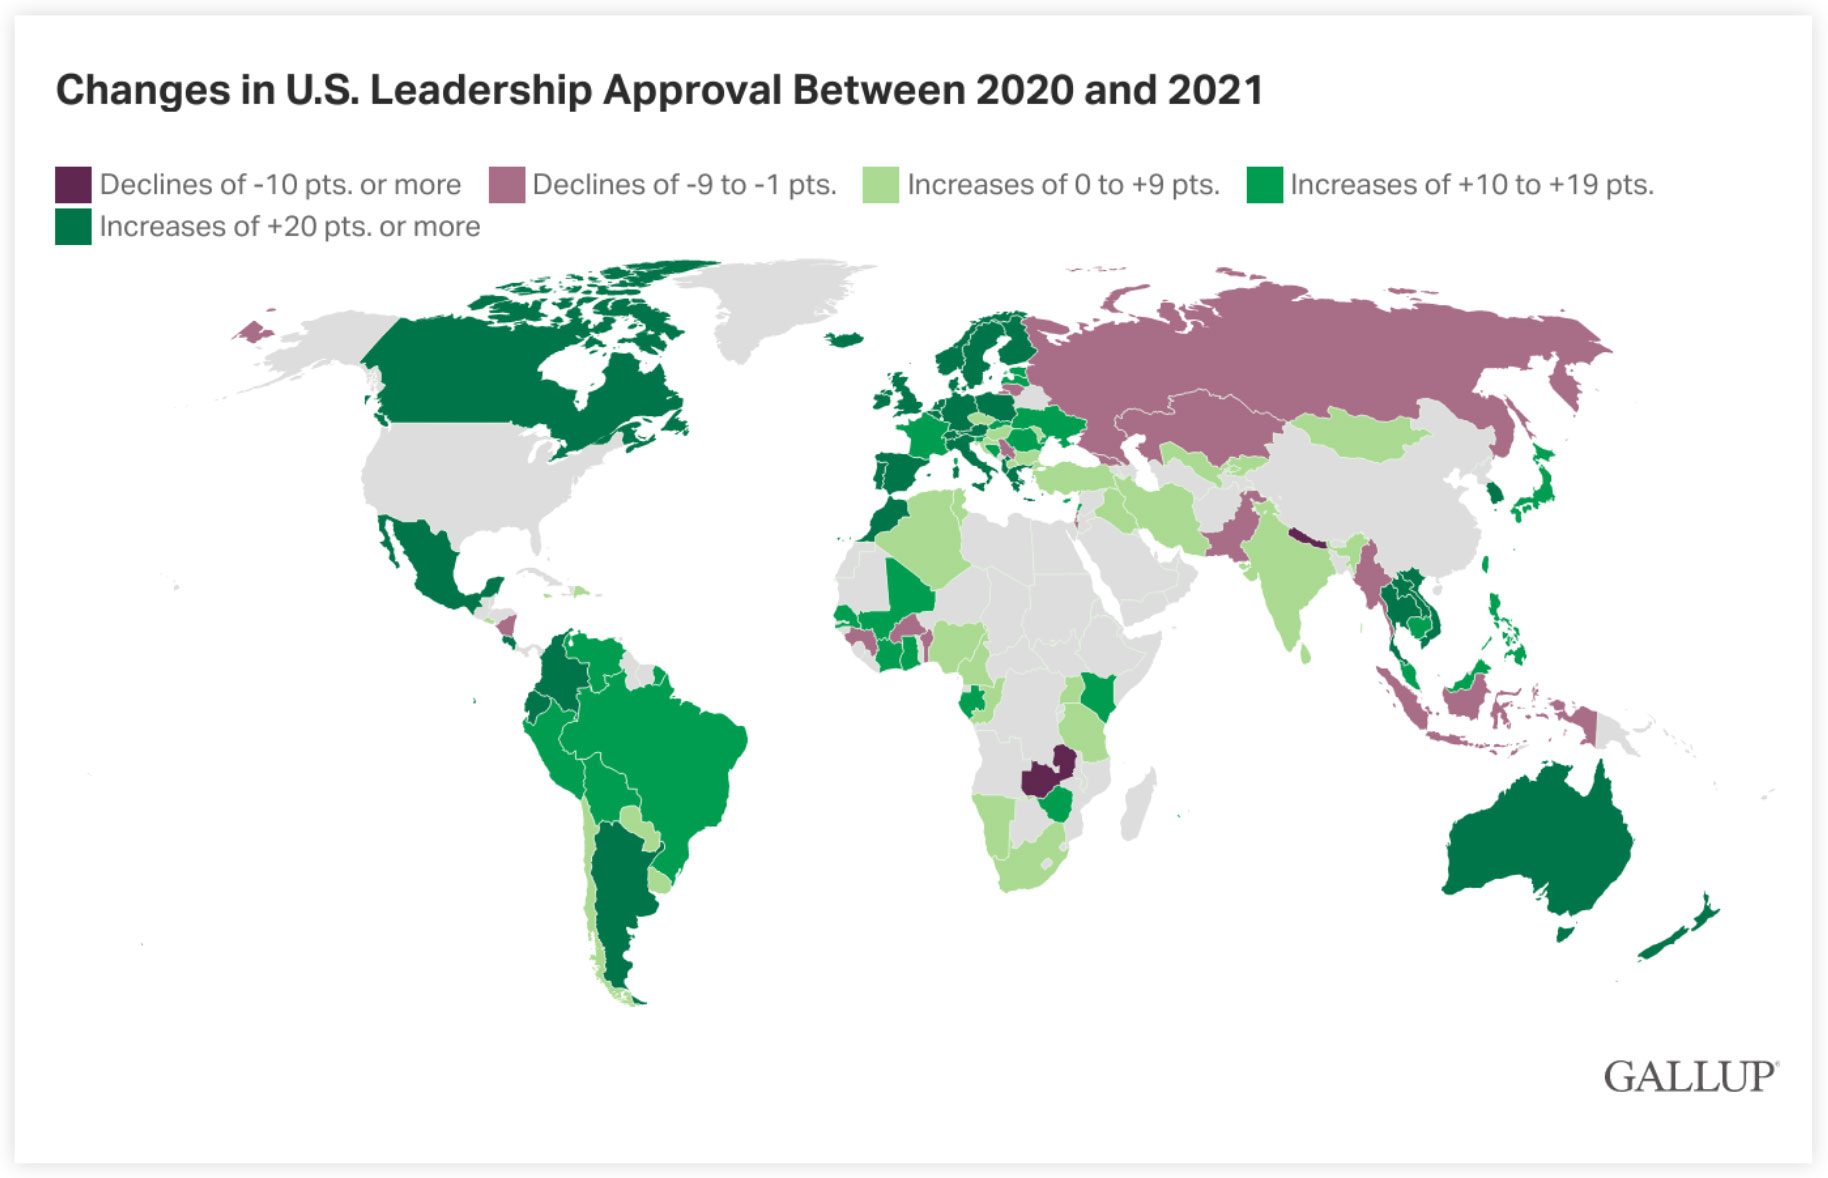 Map showing countries and their losing or gaining of public favor compares to the previous year.